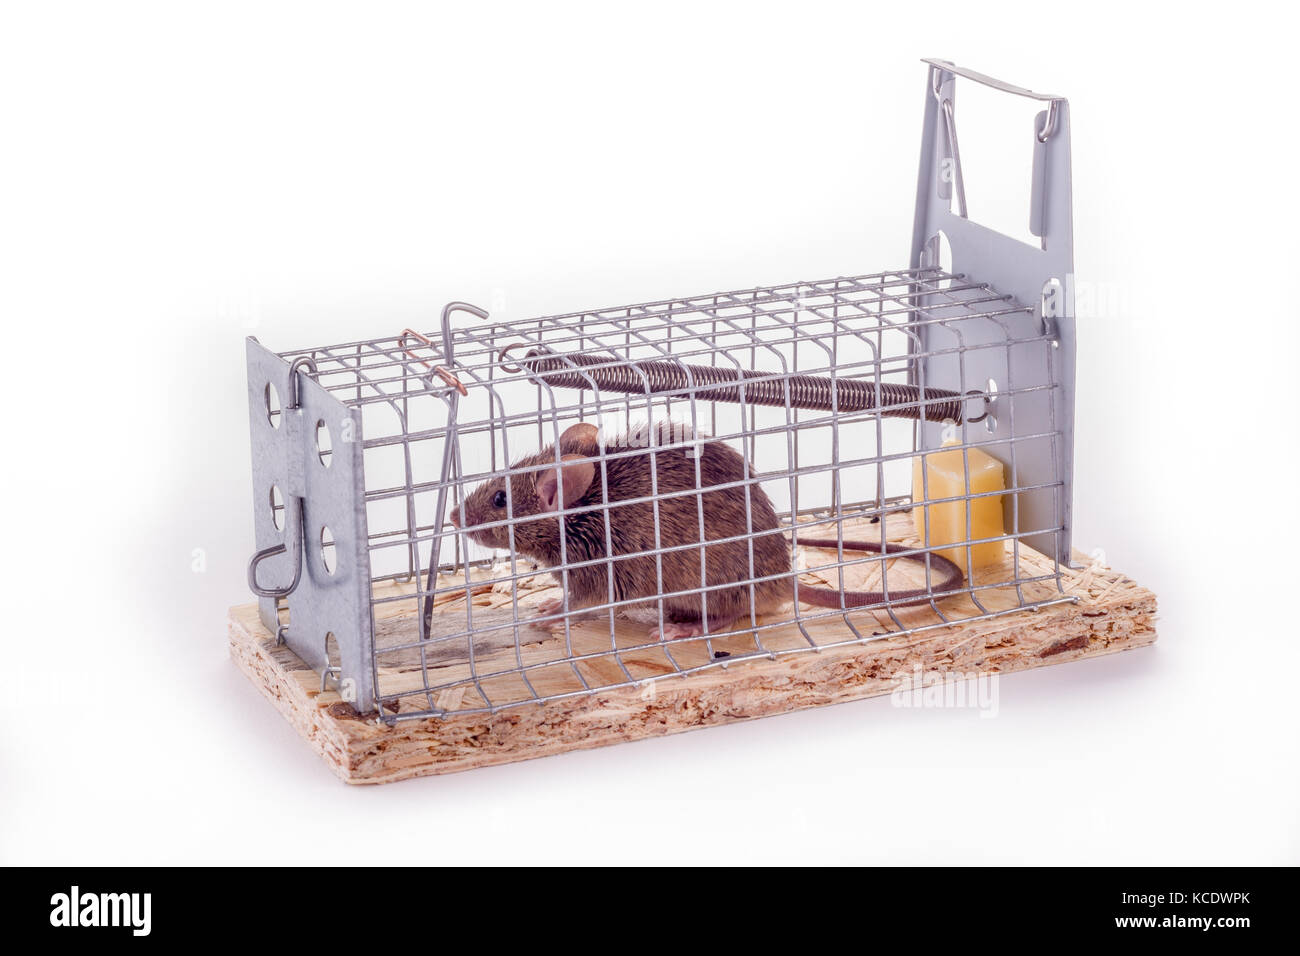 caught mouse in live trap - a Royalty Free Stock Photo from Photocase